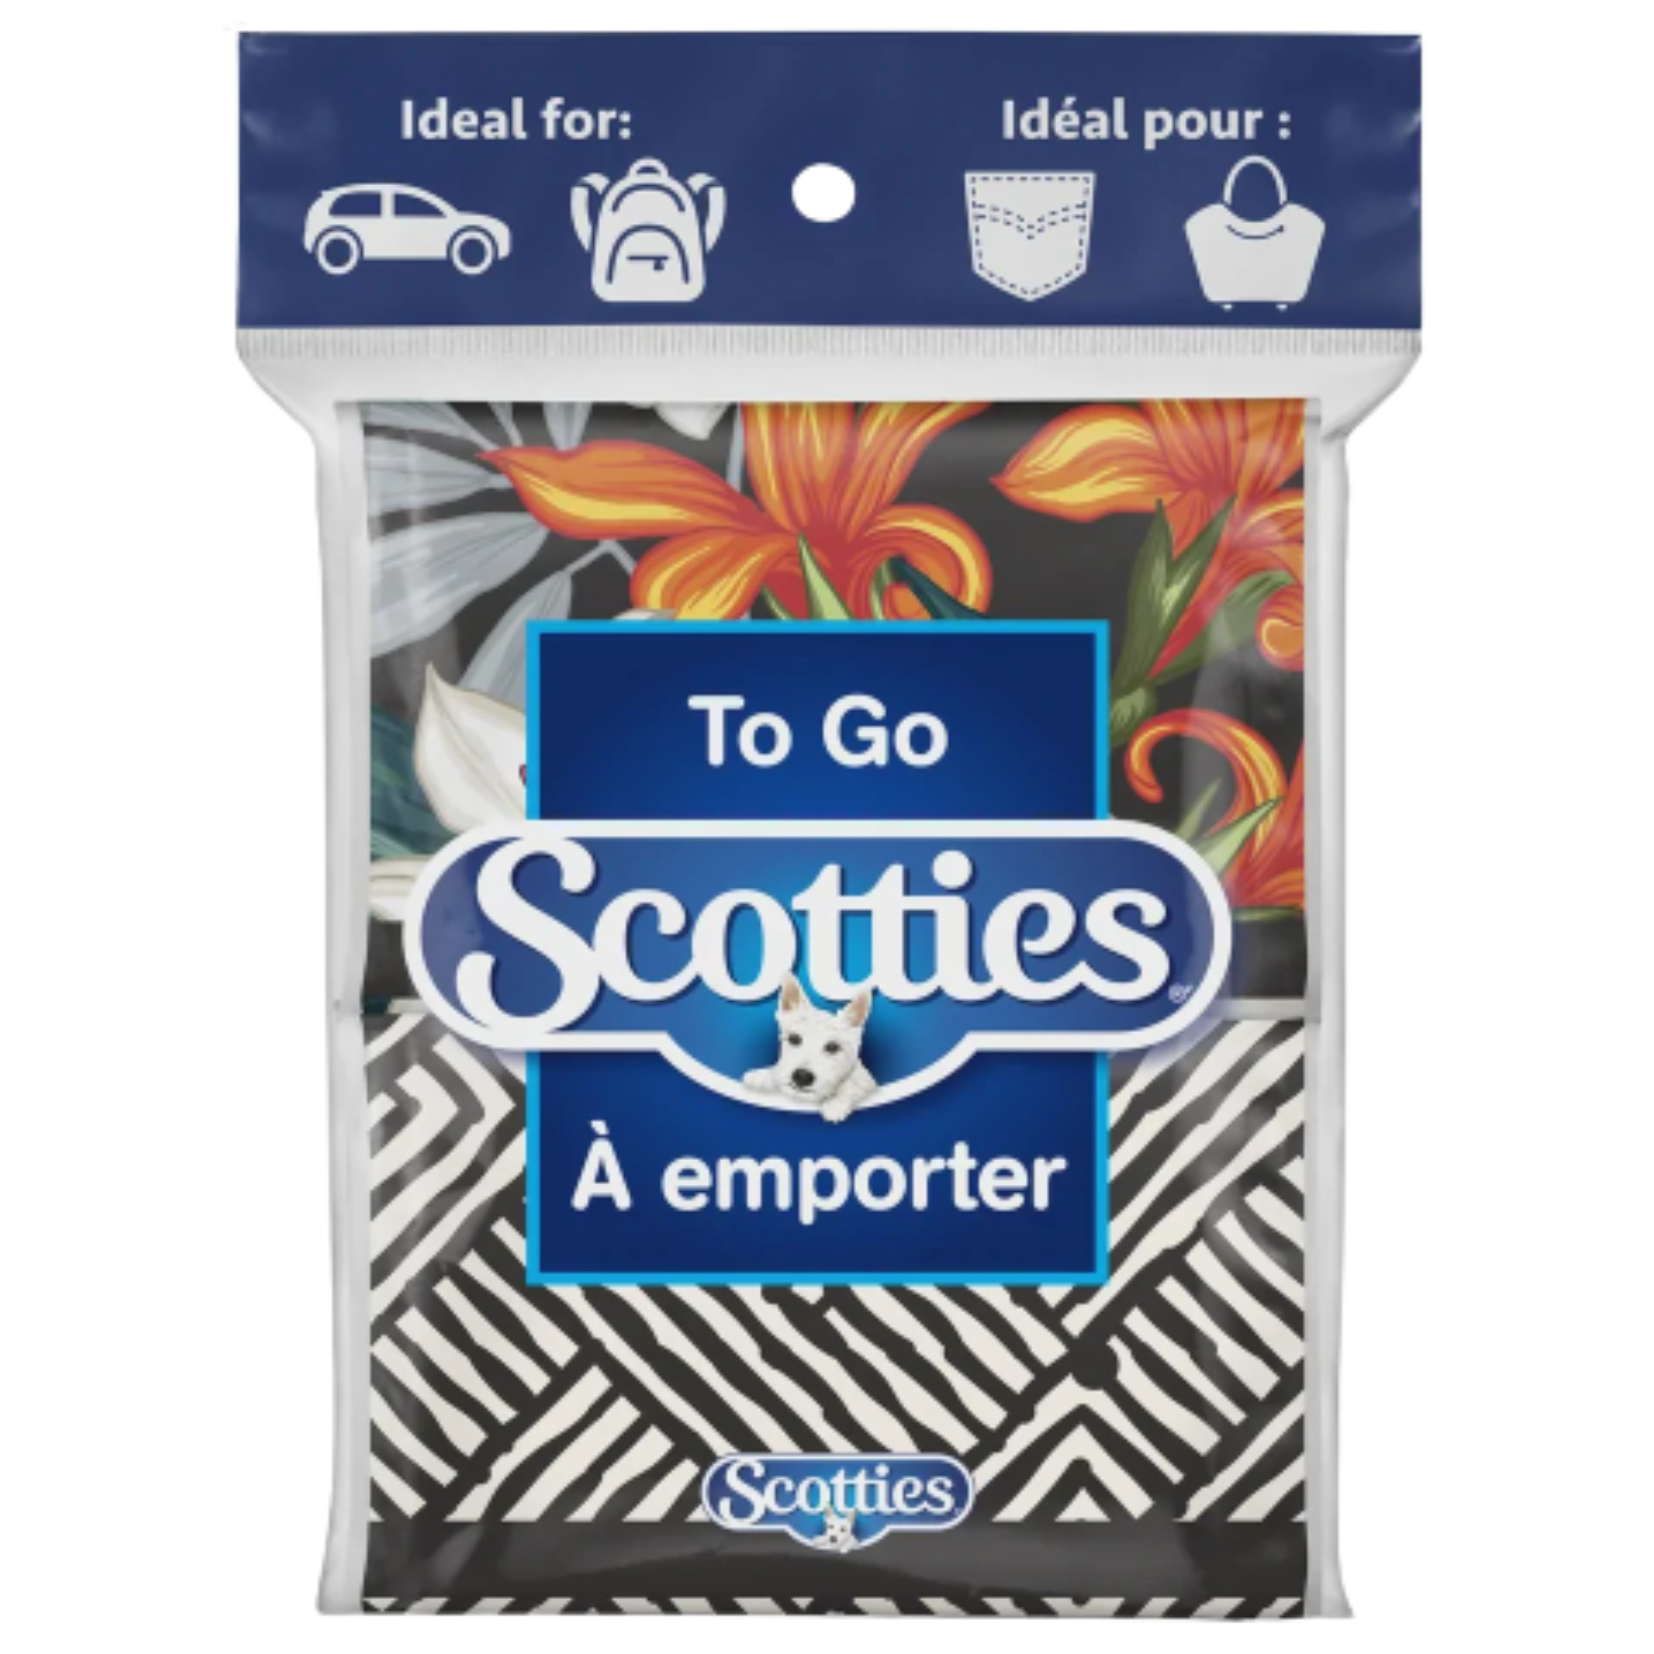 Scotties To Go Facial Tissues 10ct x 8